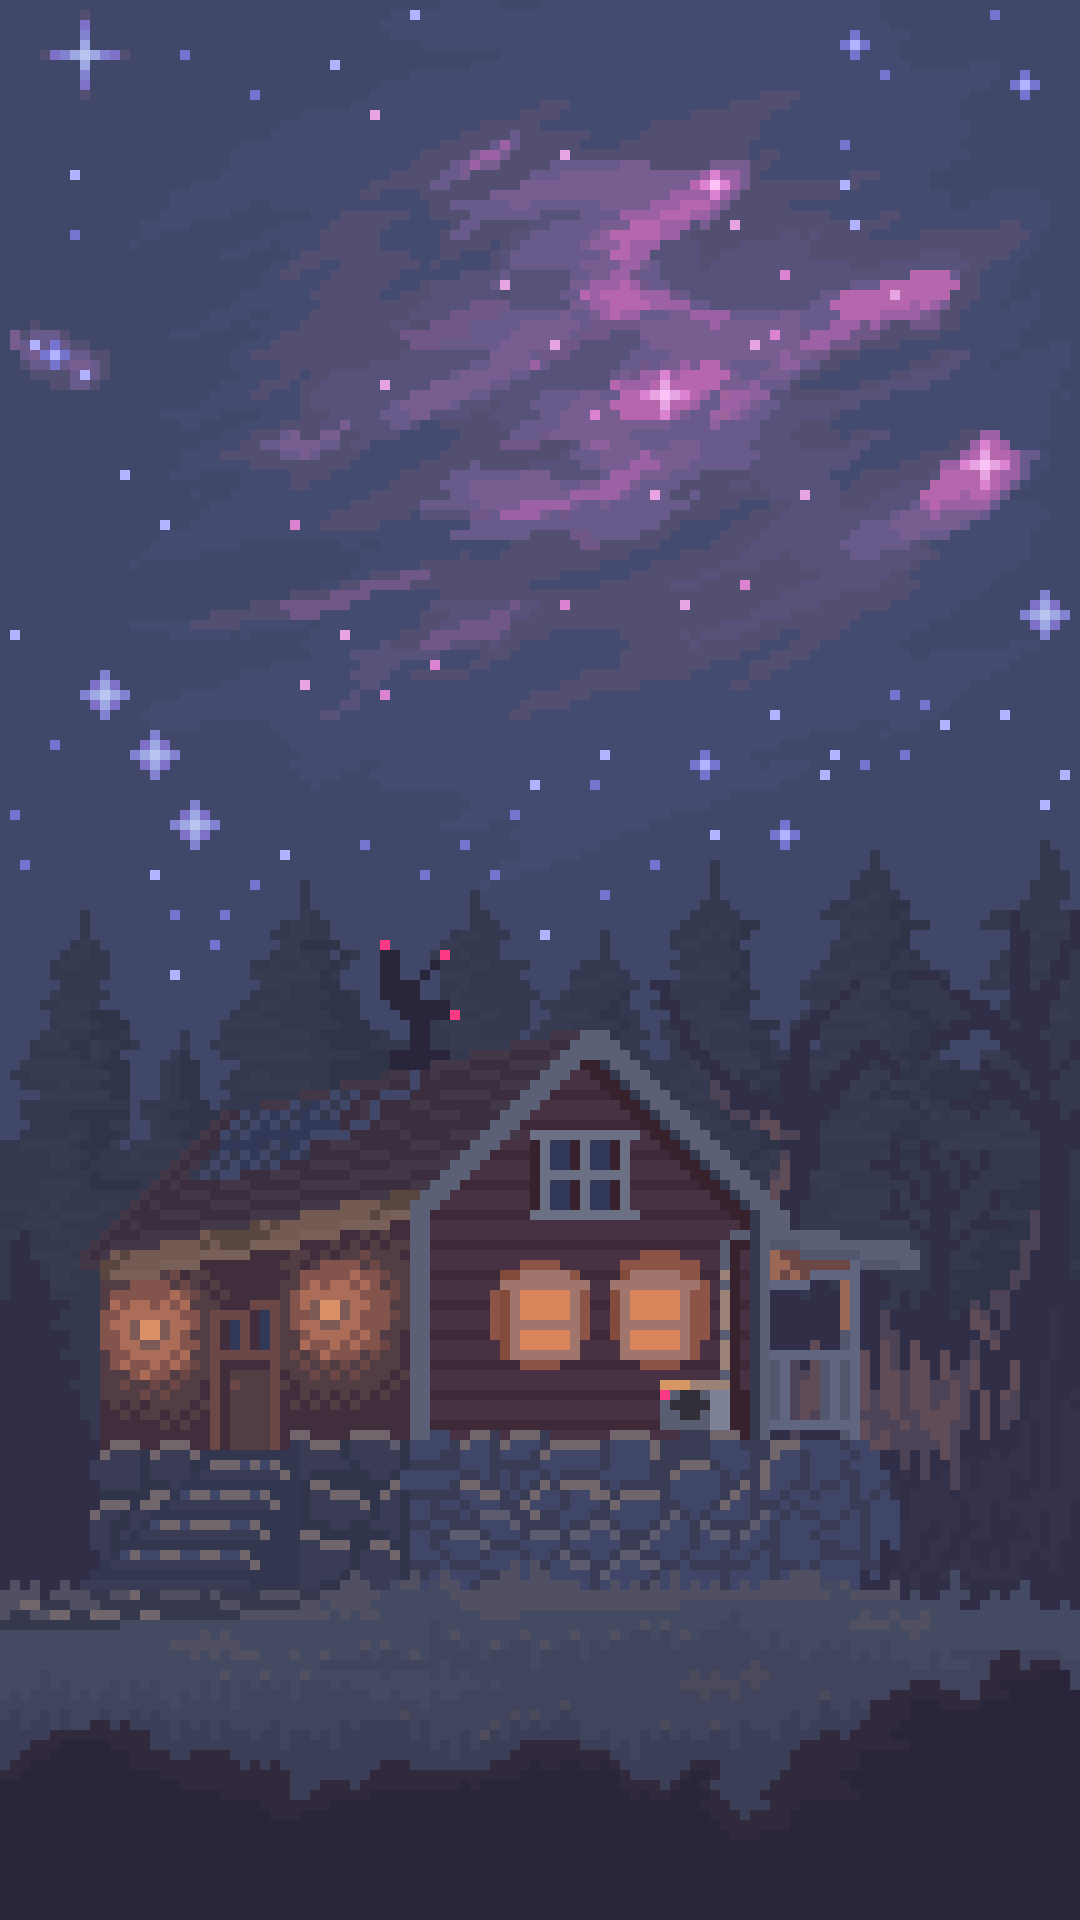 The night sky (full view on phone is recommended). Pixel art landscape, Cool pixel art, Pixel art design